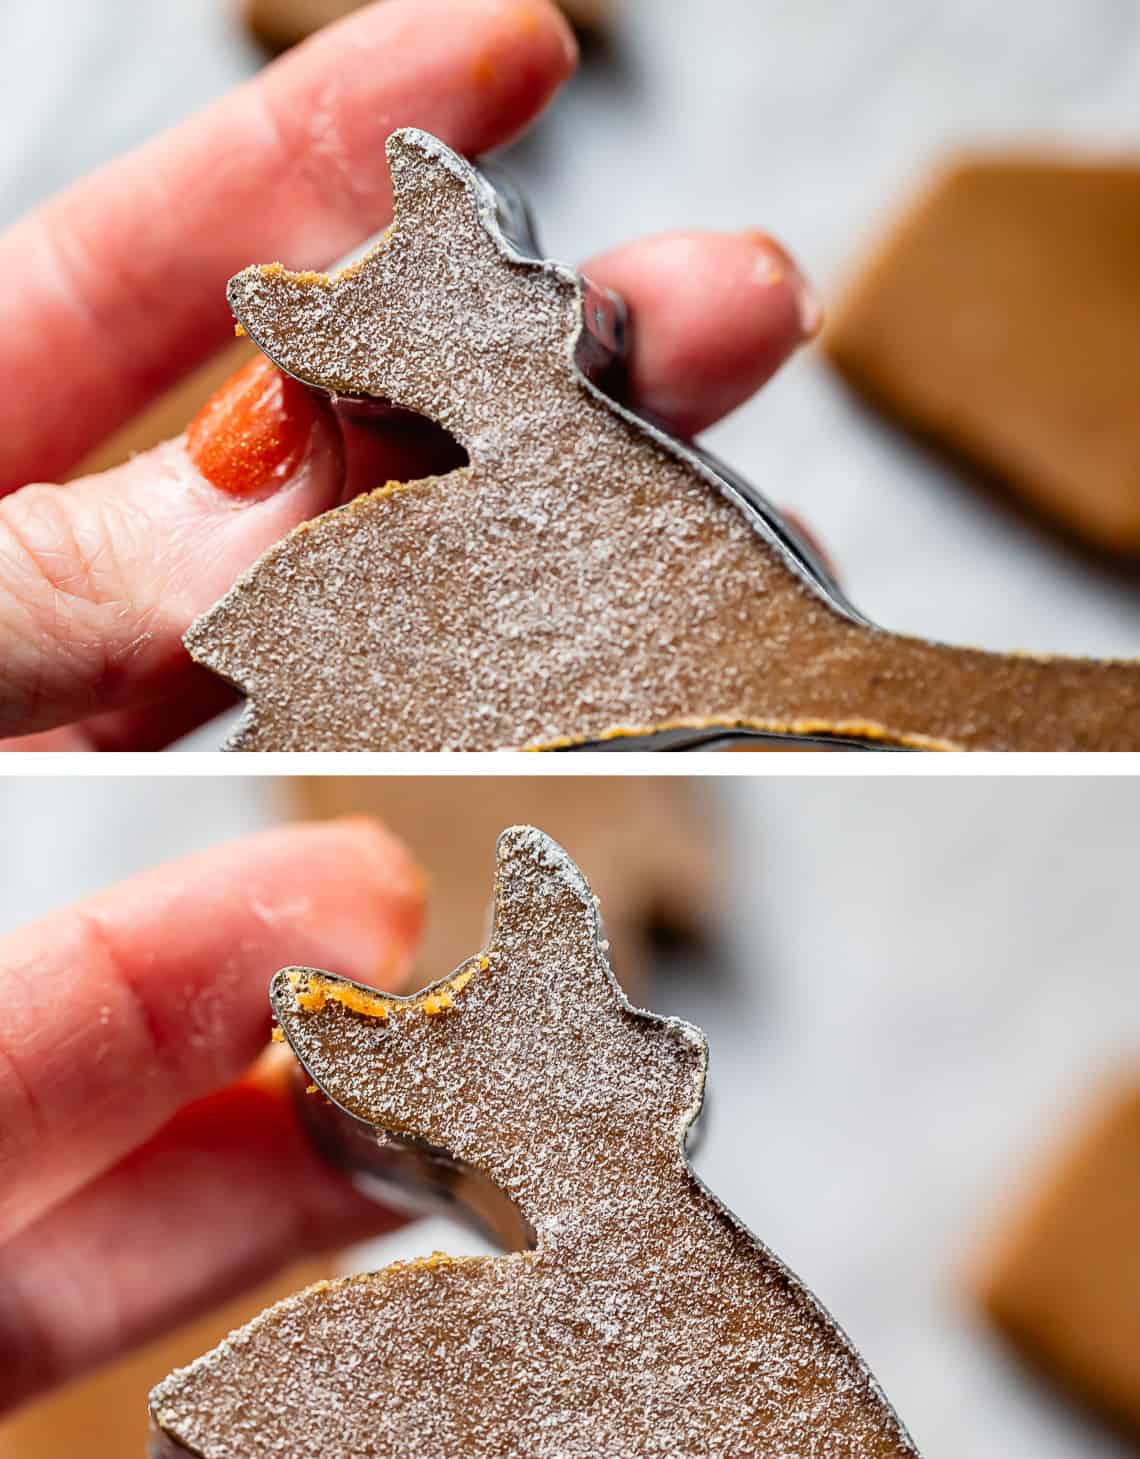 top hand holding a deer cookie cutter with dough in it, bottom wiping flour from the edges of the deer.